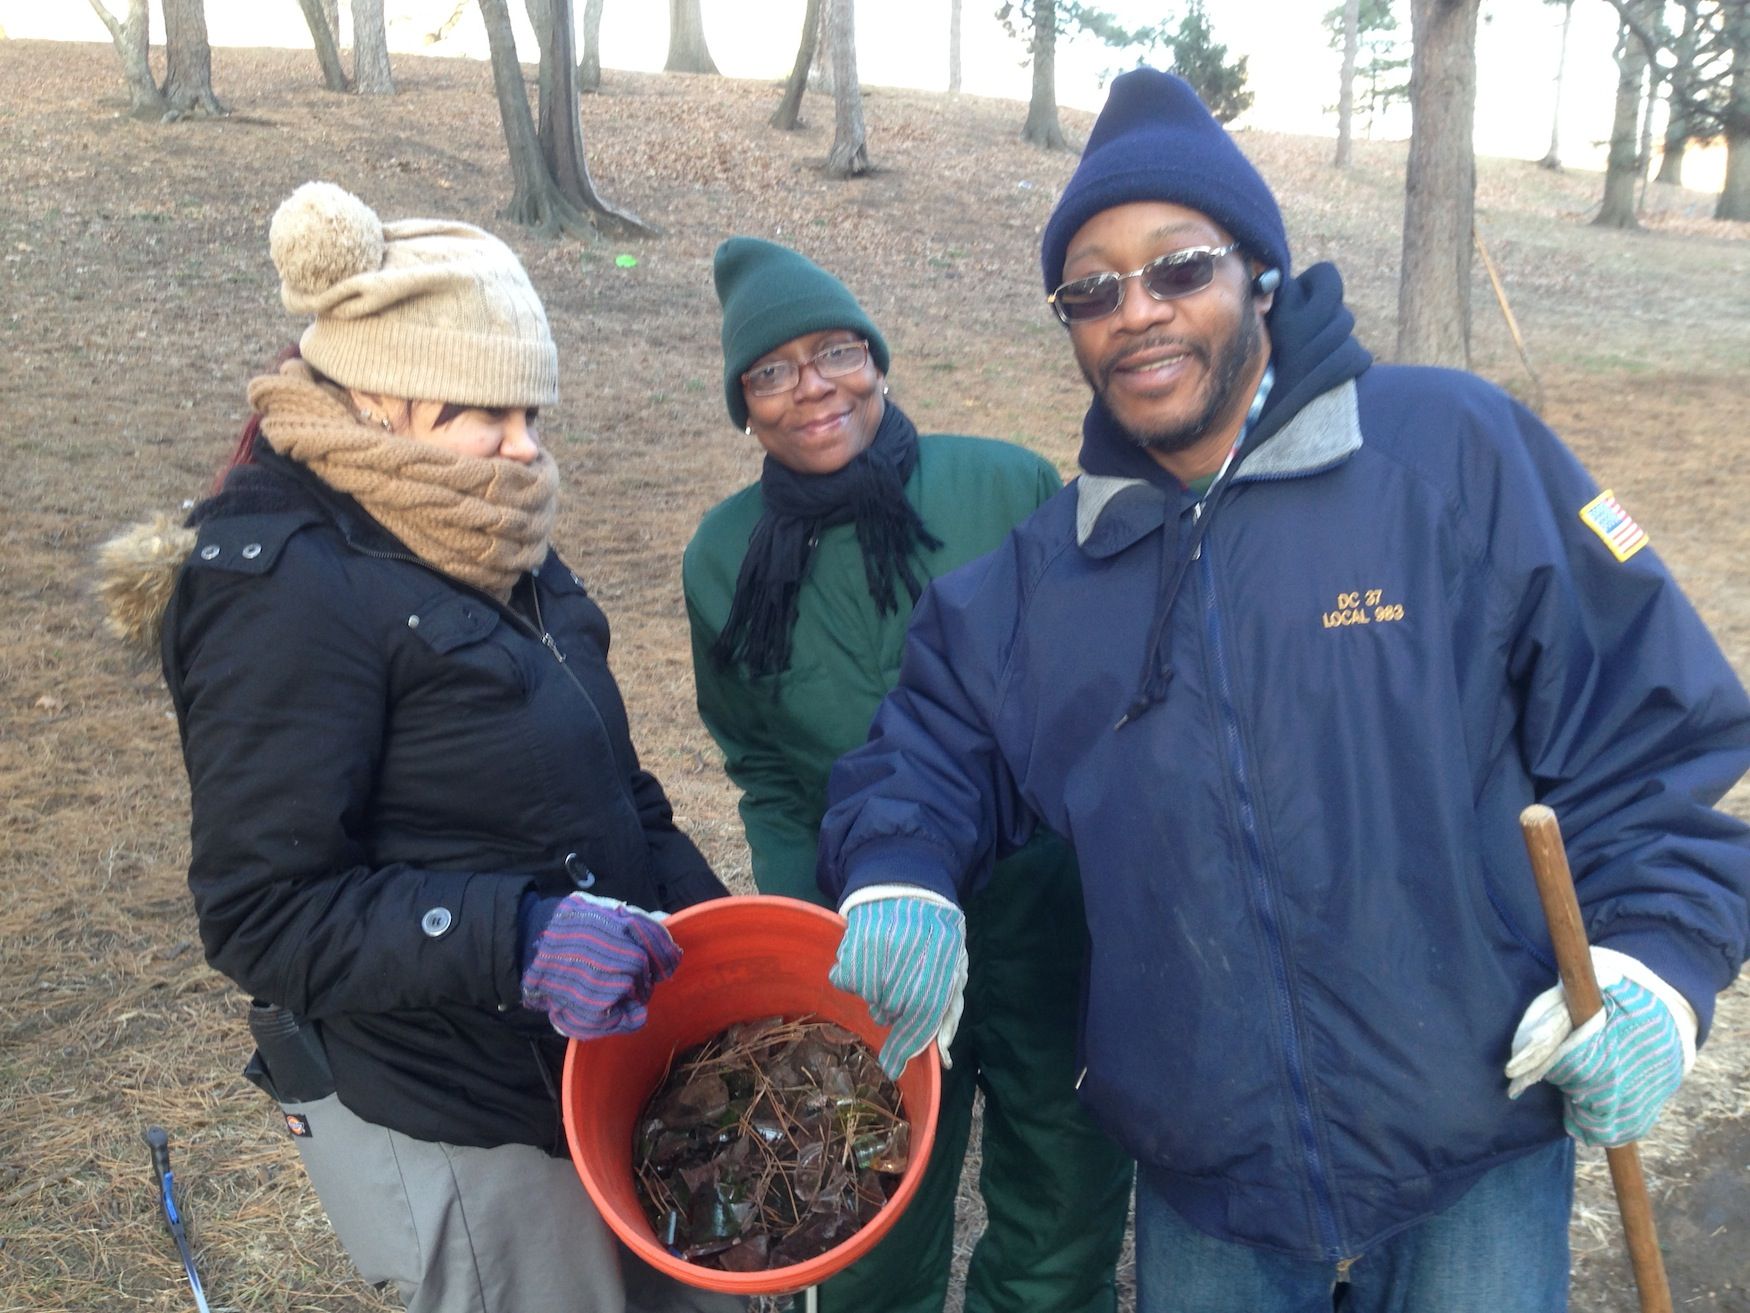 Glass Patrols To Help Clean Up, Beautify Fort Greene Park